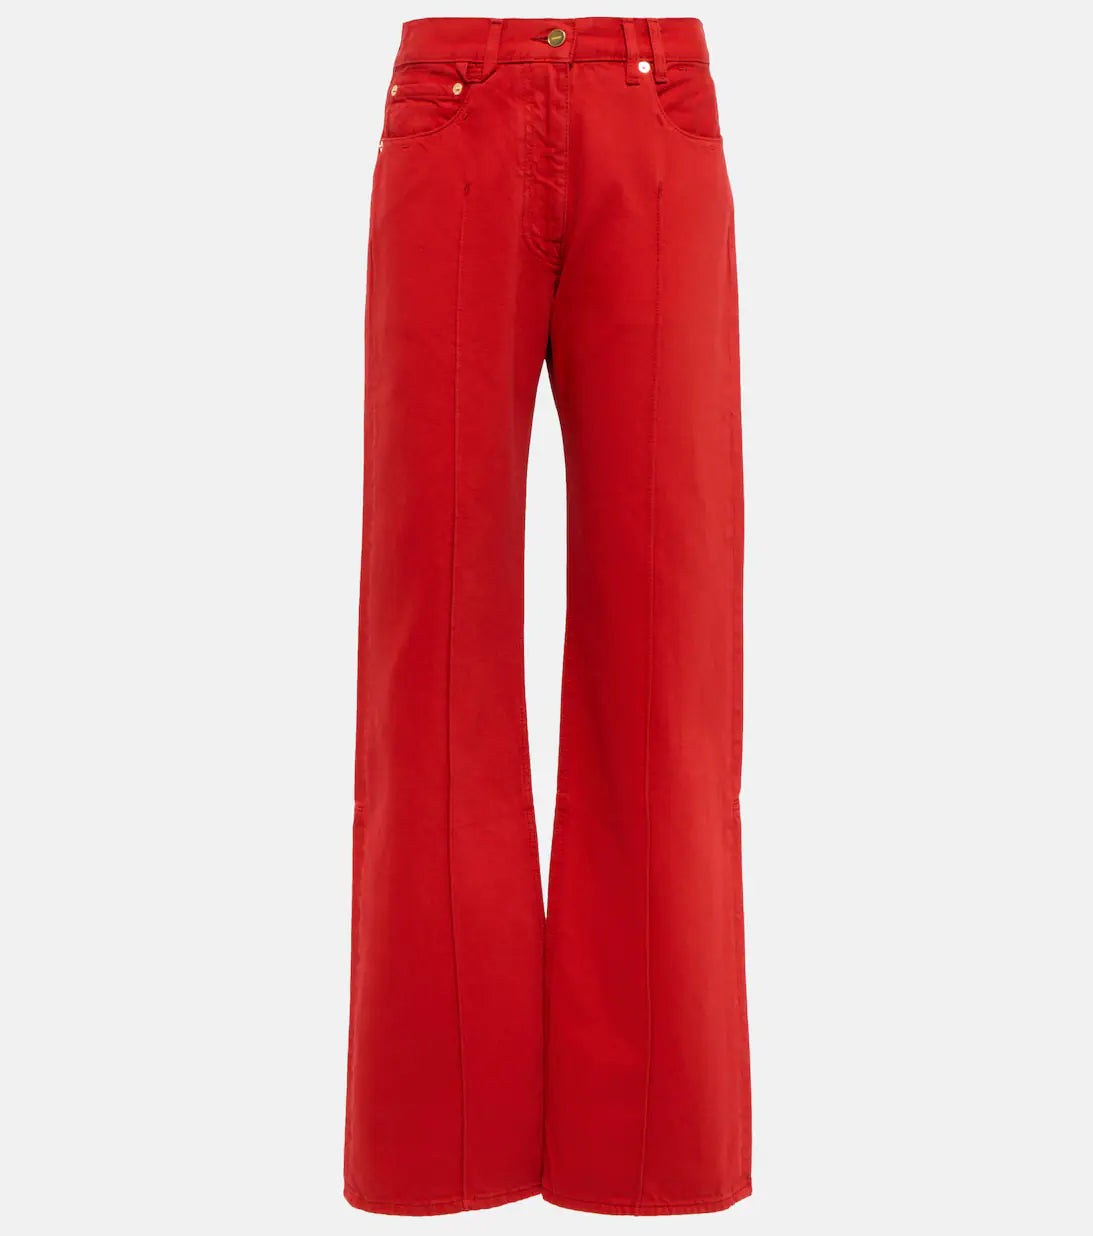 110 denim - front in red